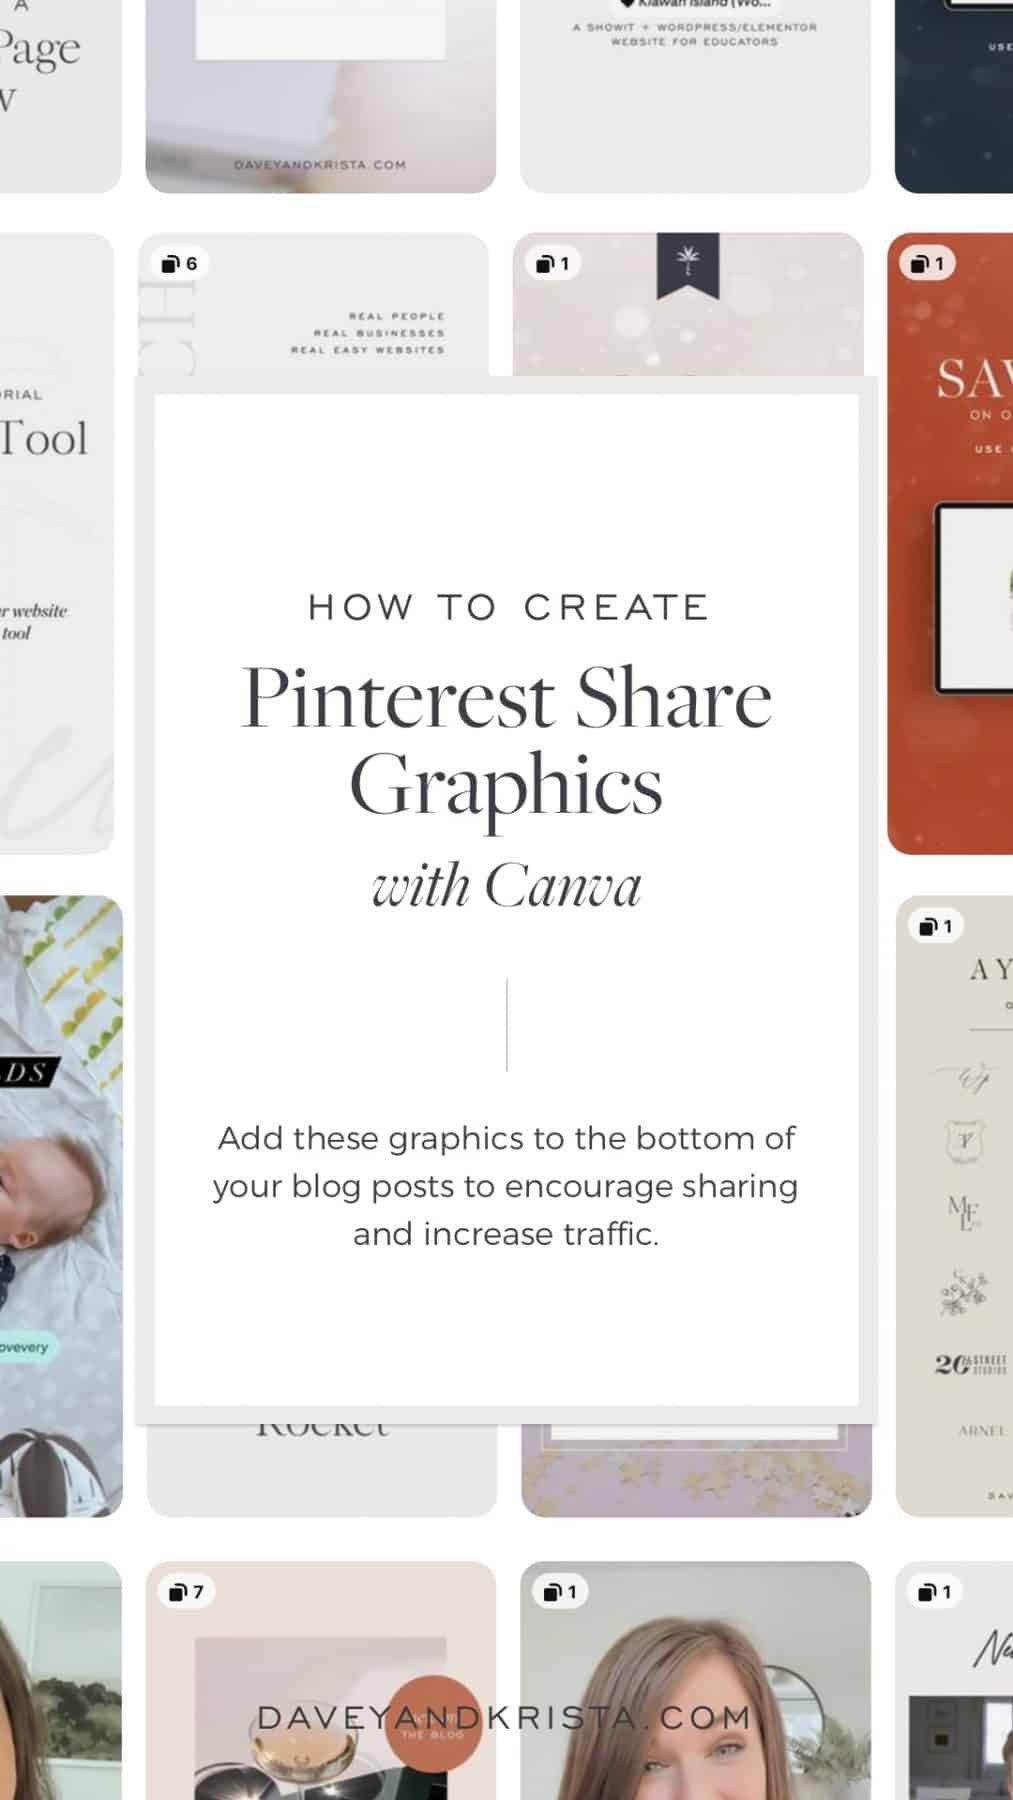 How to Create Pinterest Share Graphics with Canva